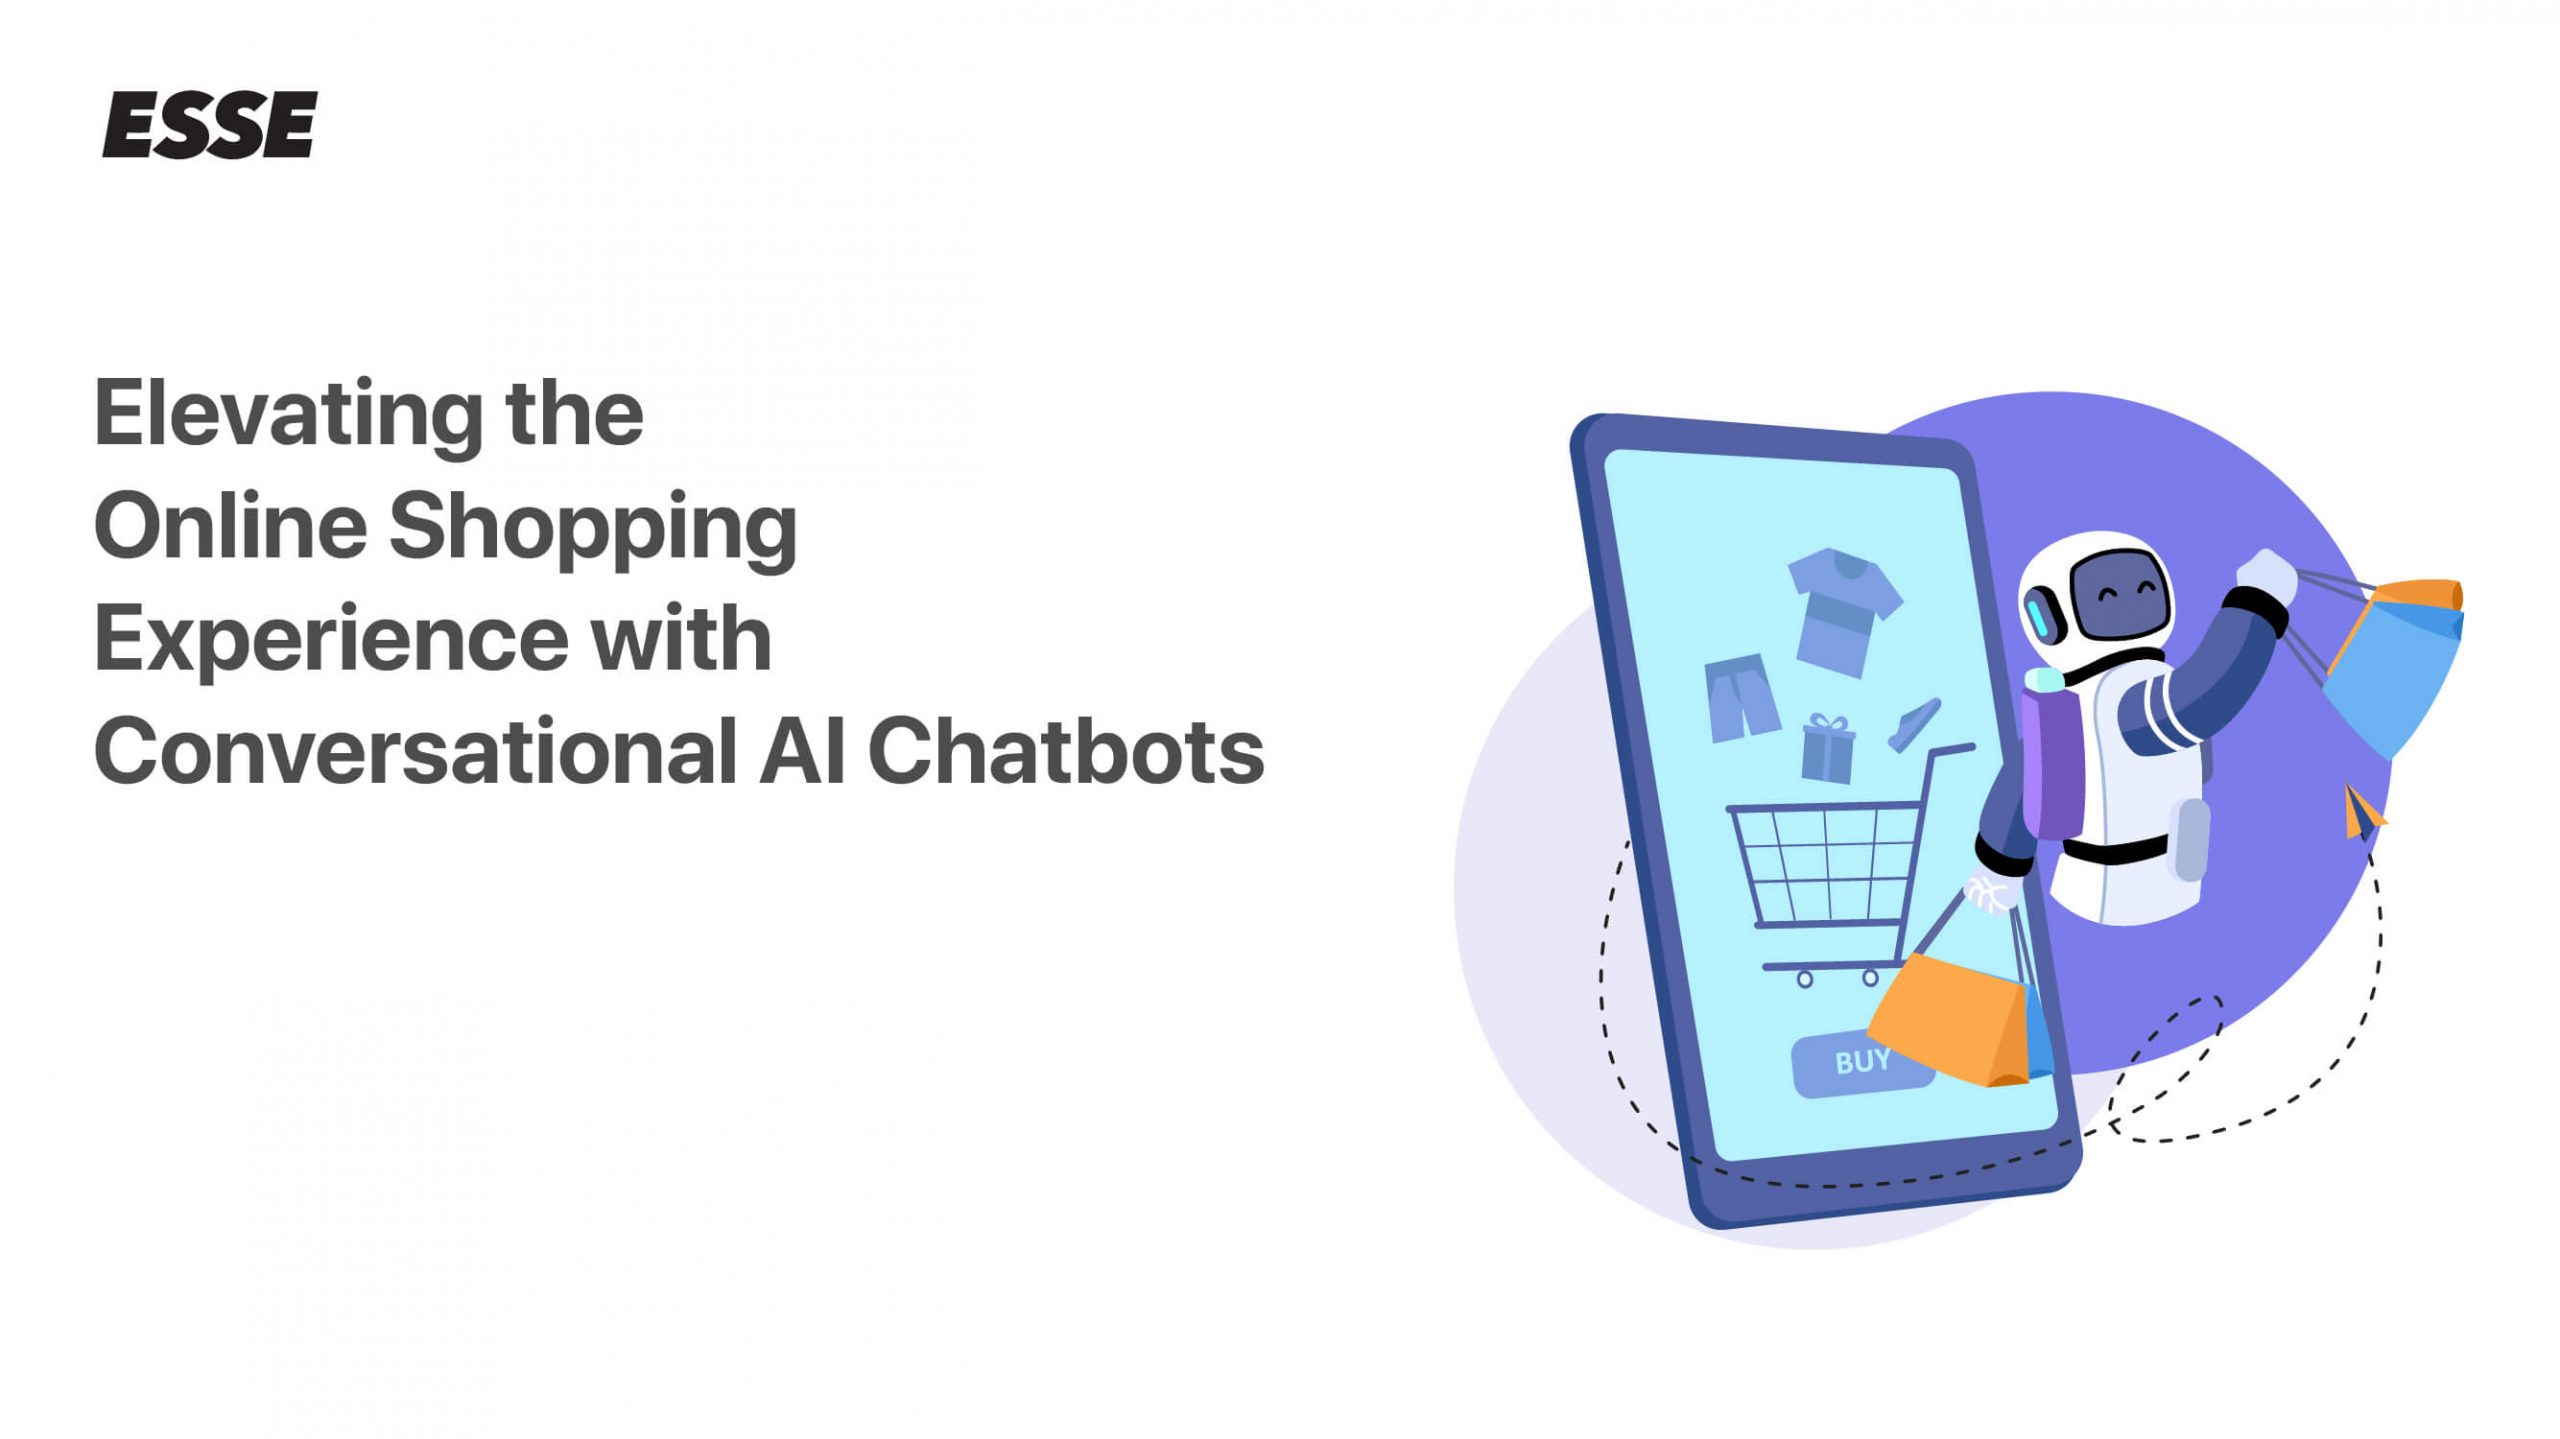 Elevating the Online Shopping Experience with Conversational AI Chatbots